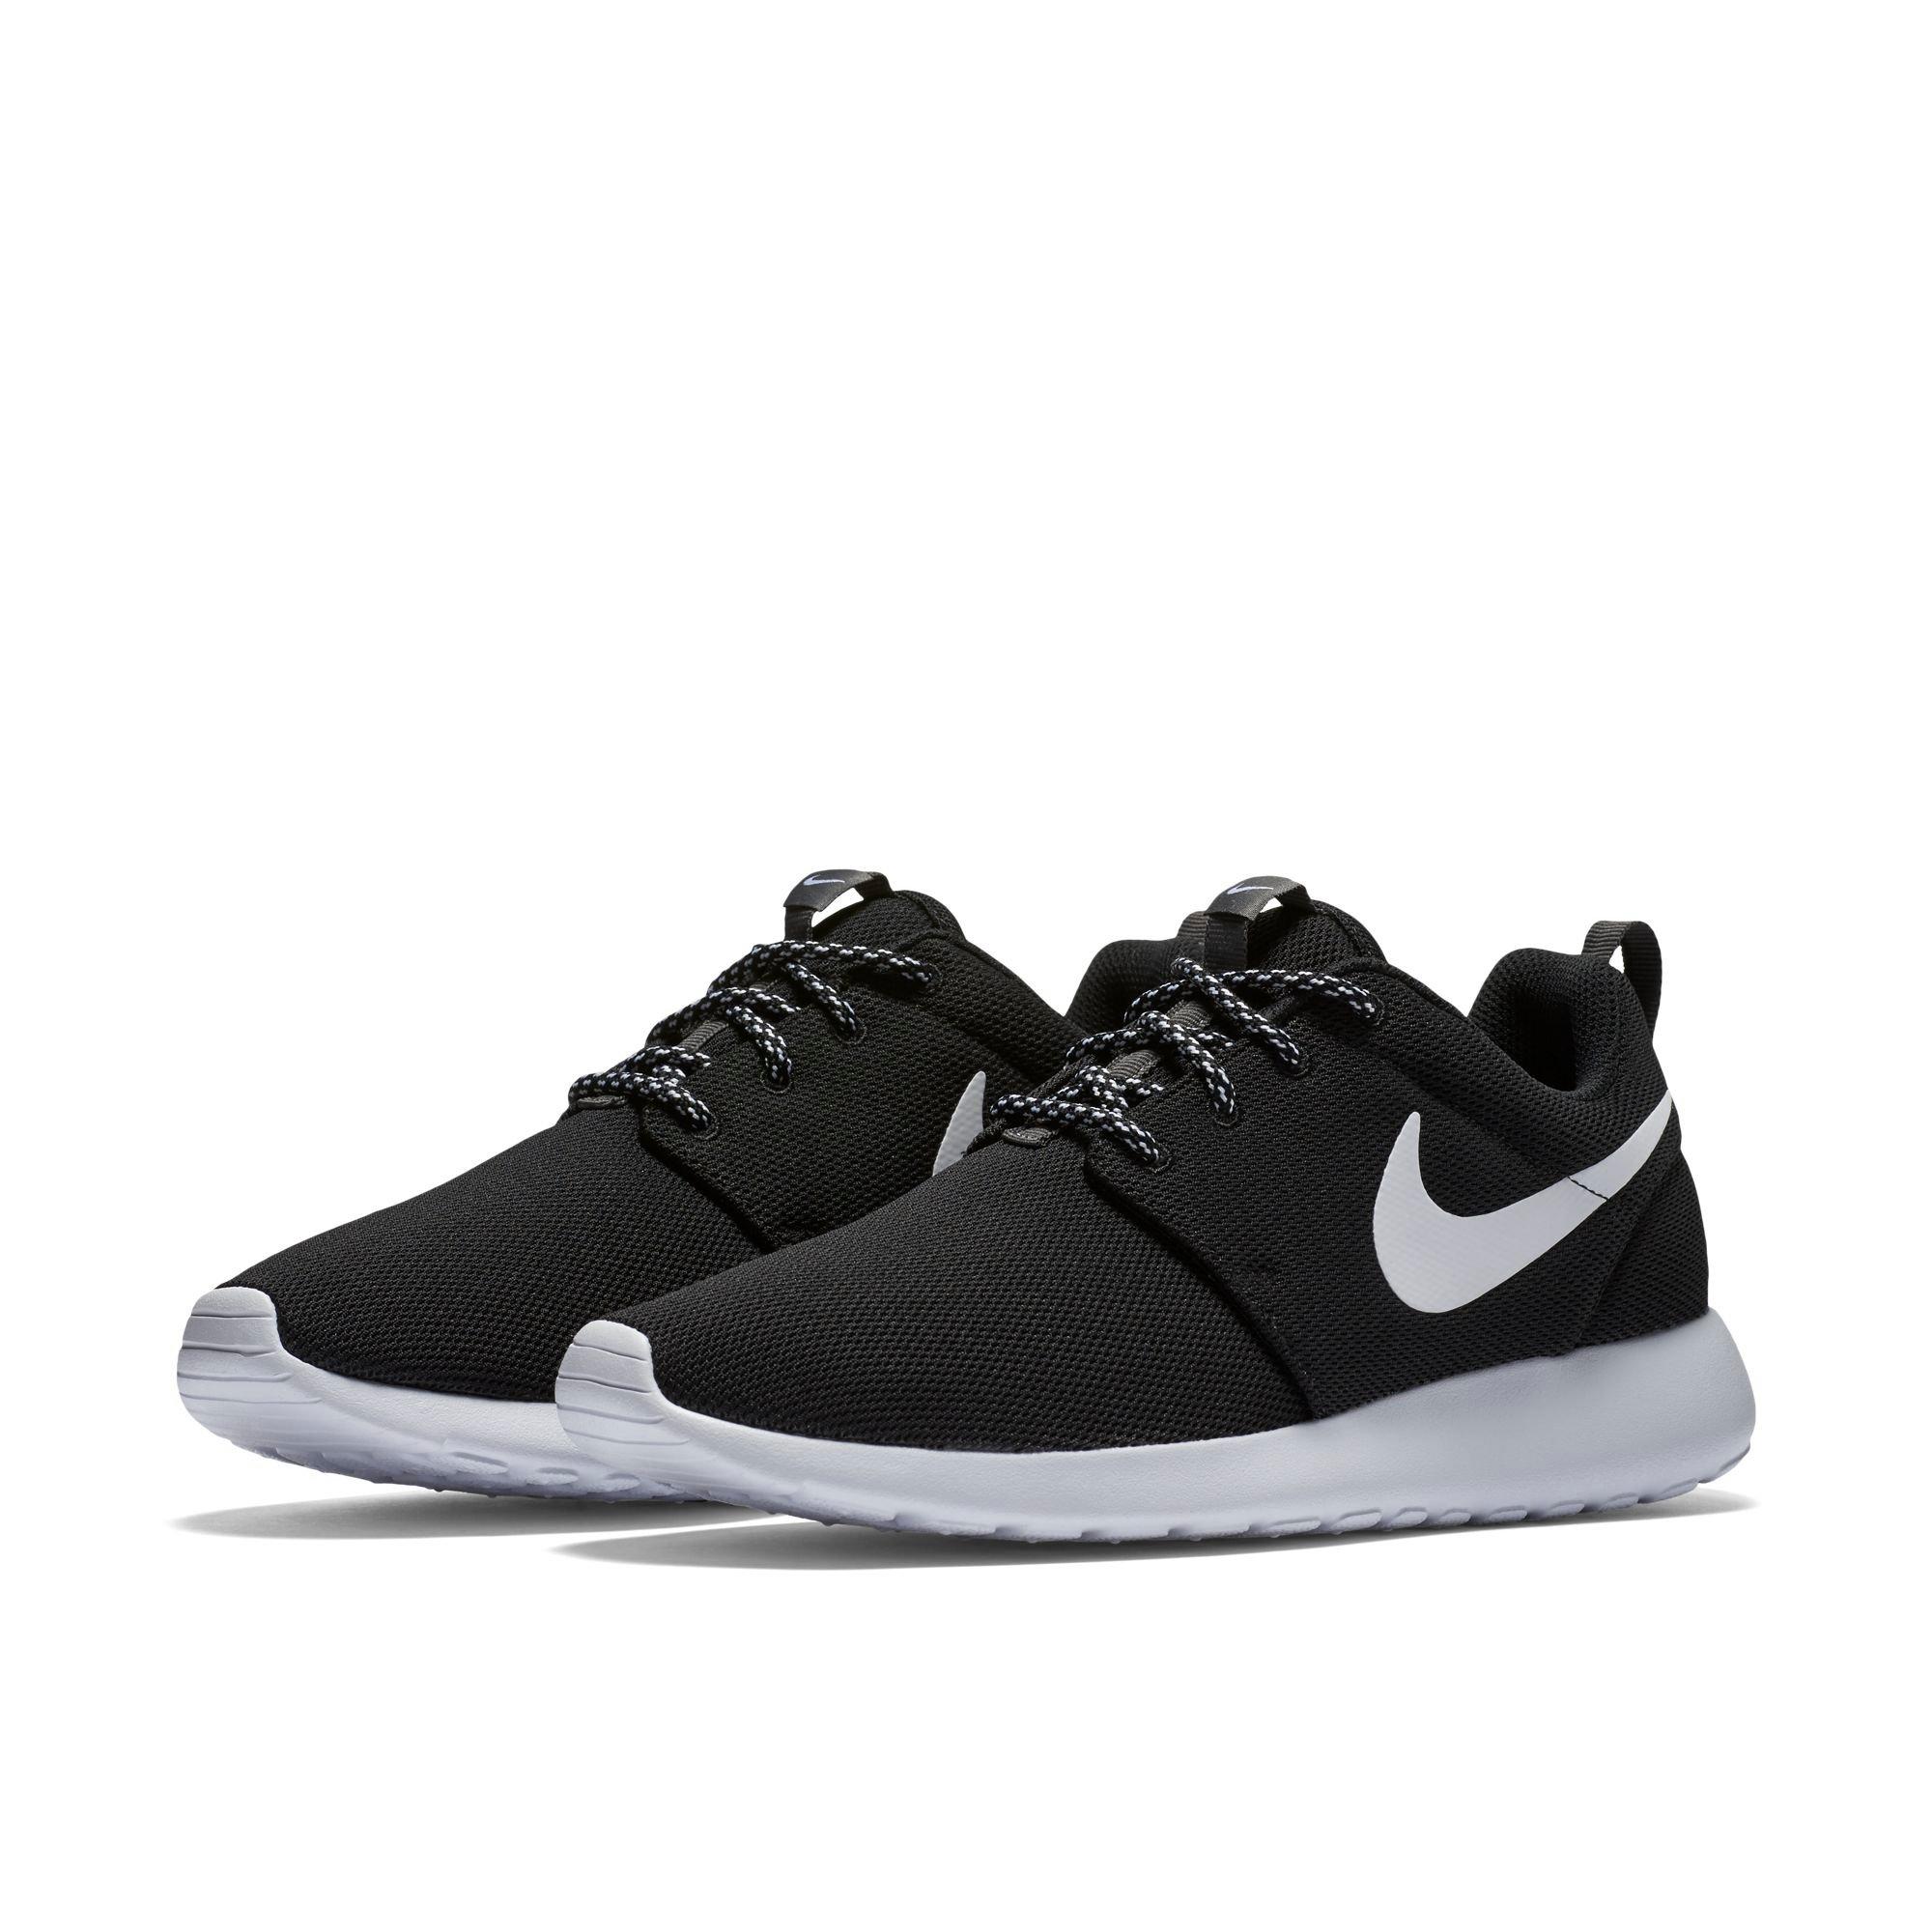 women's roshe one casual sneakers